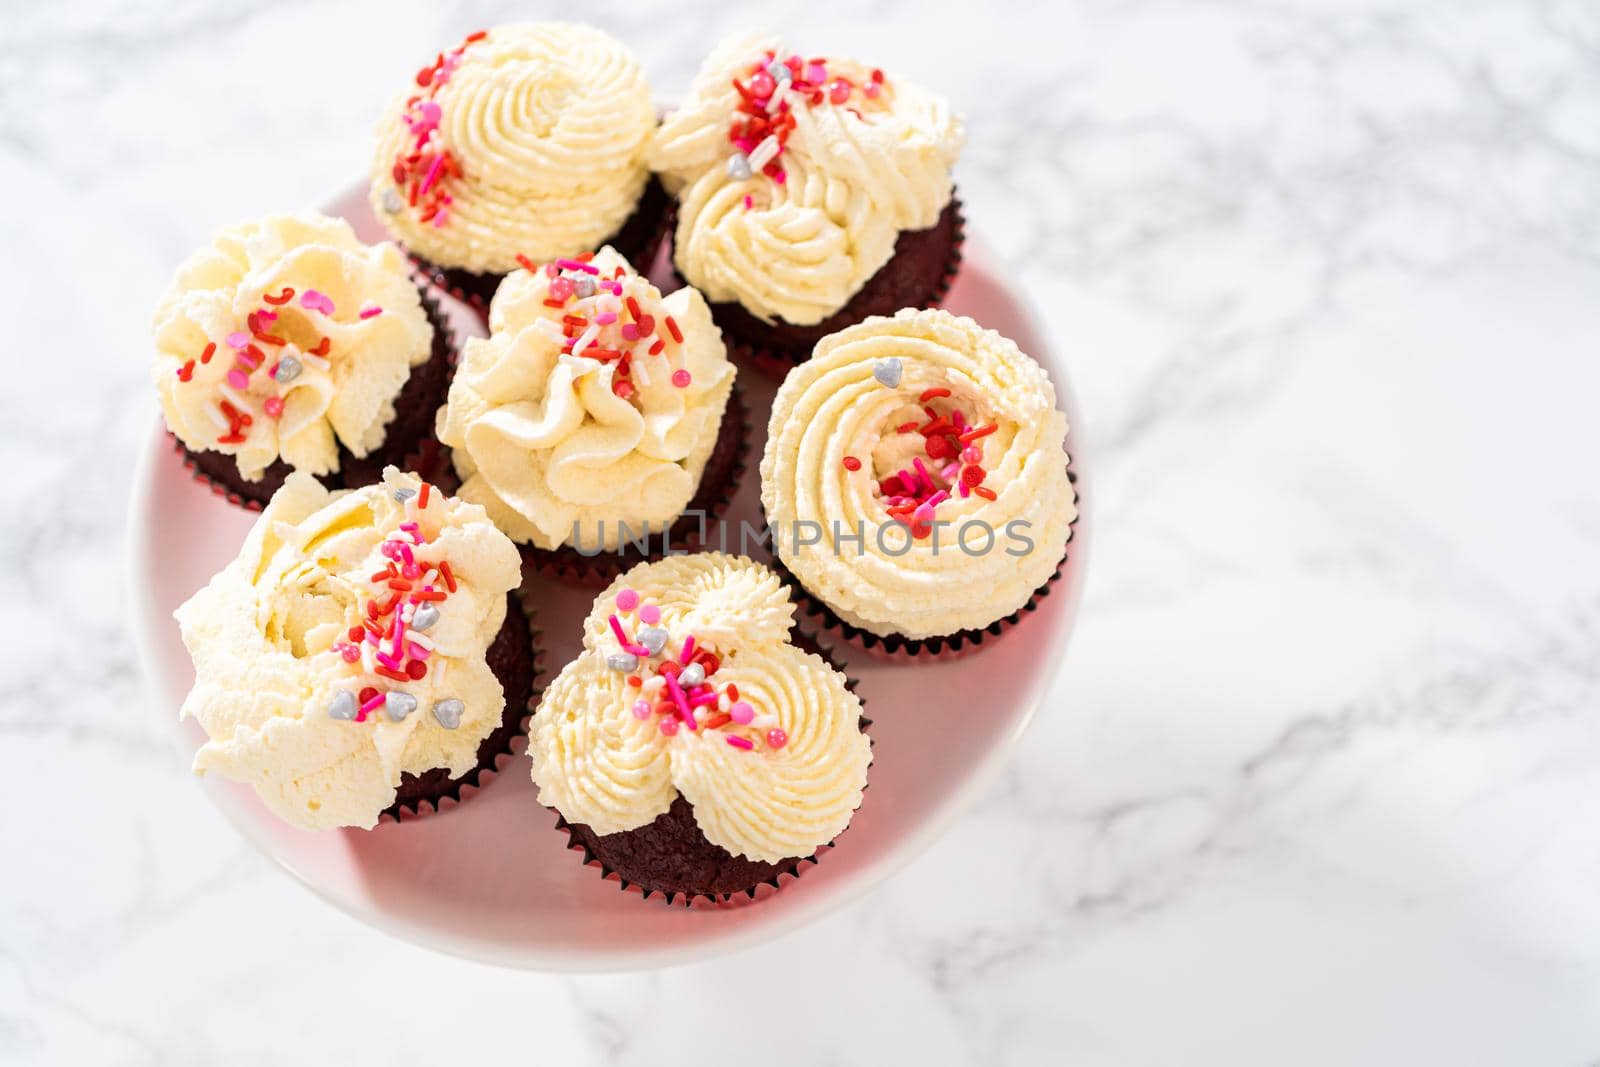 Red Velvet Cupcakes with White Chocolate Ganache Frosting by arinahabich